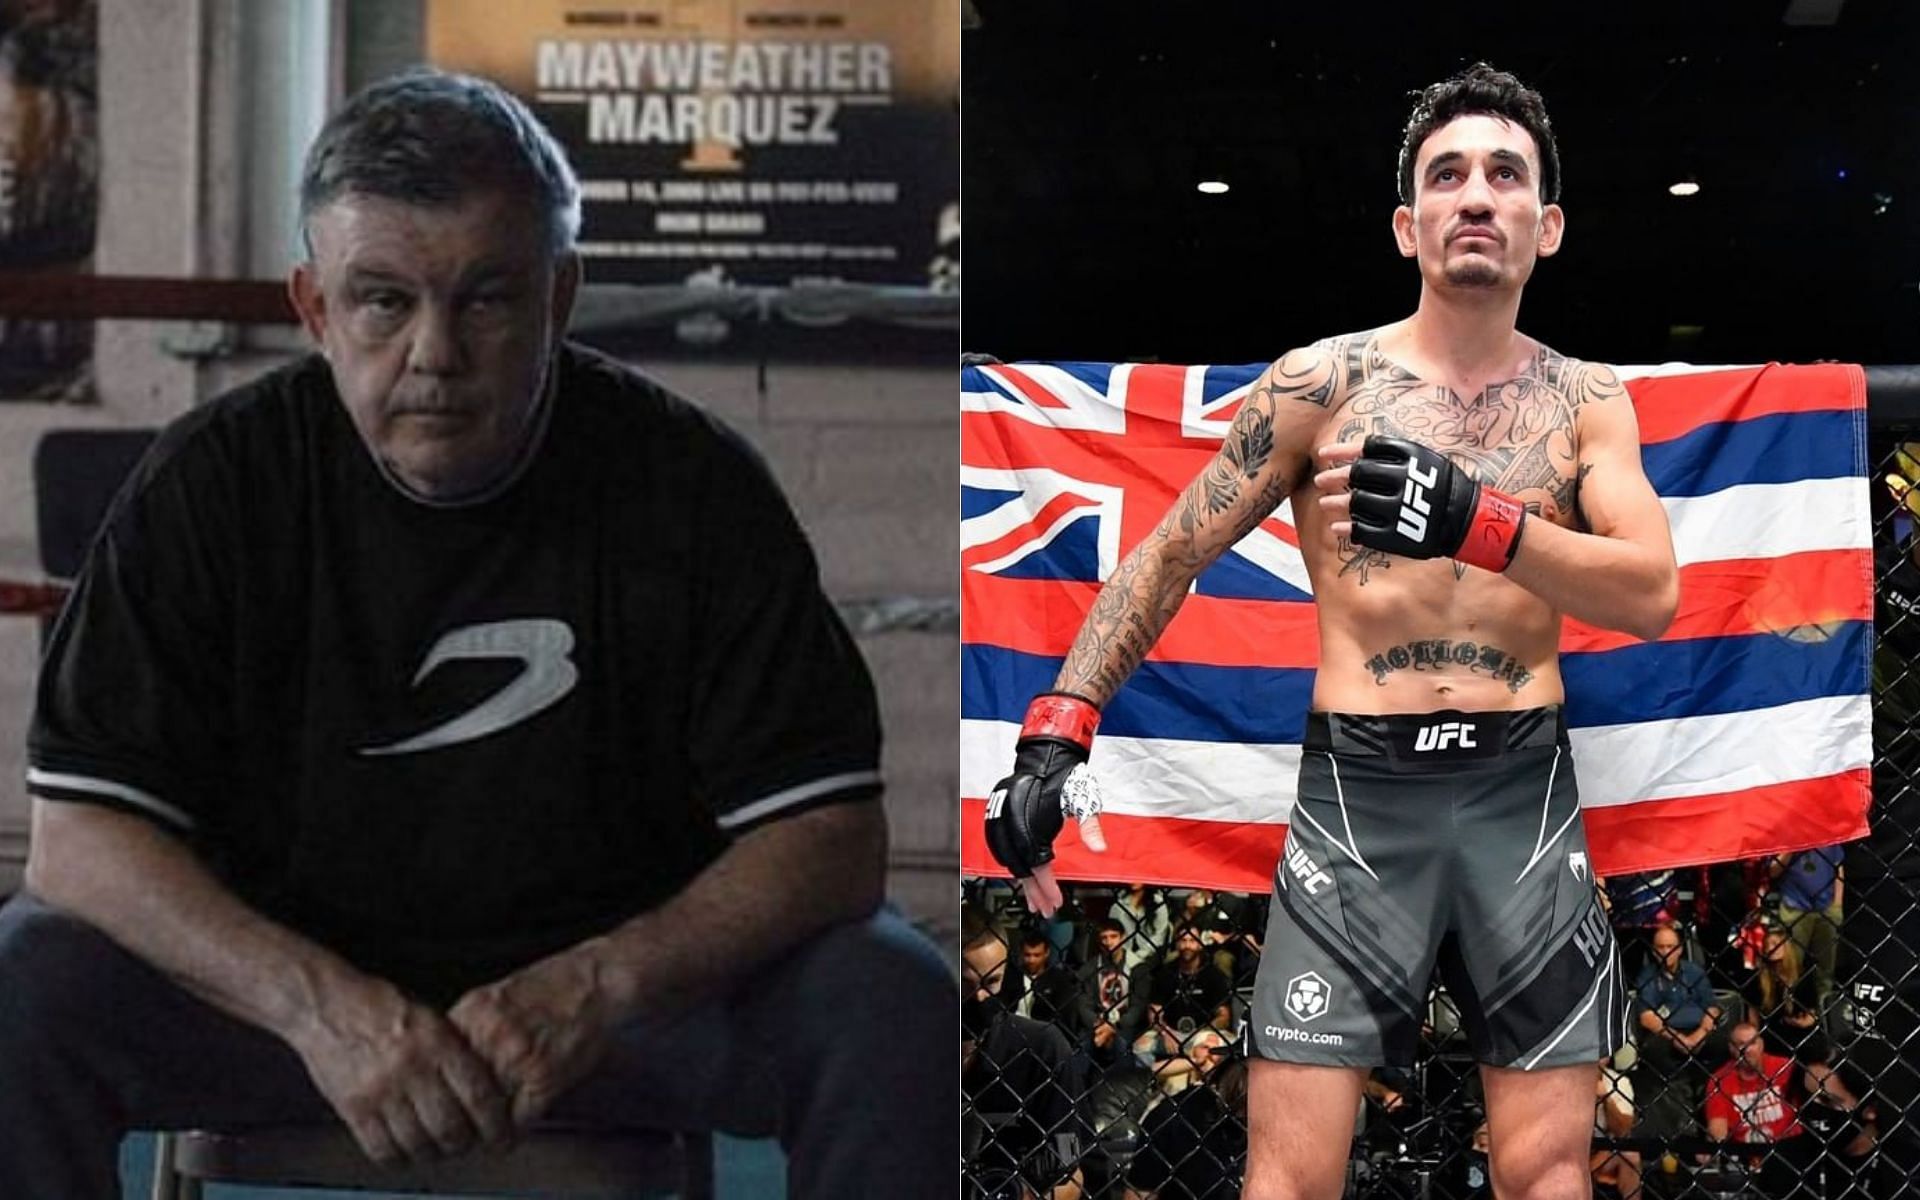 Teddy Atlas compares Max Holloway to a Swiss Military pocket knife